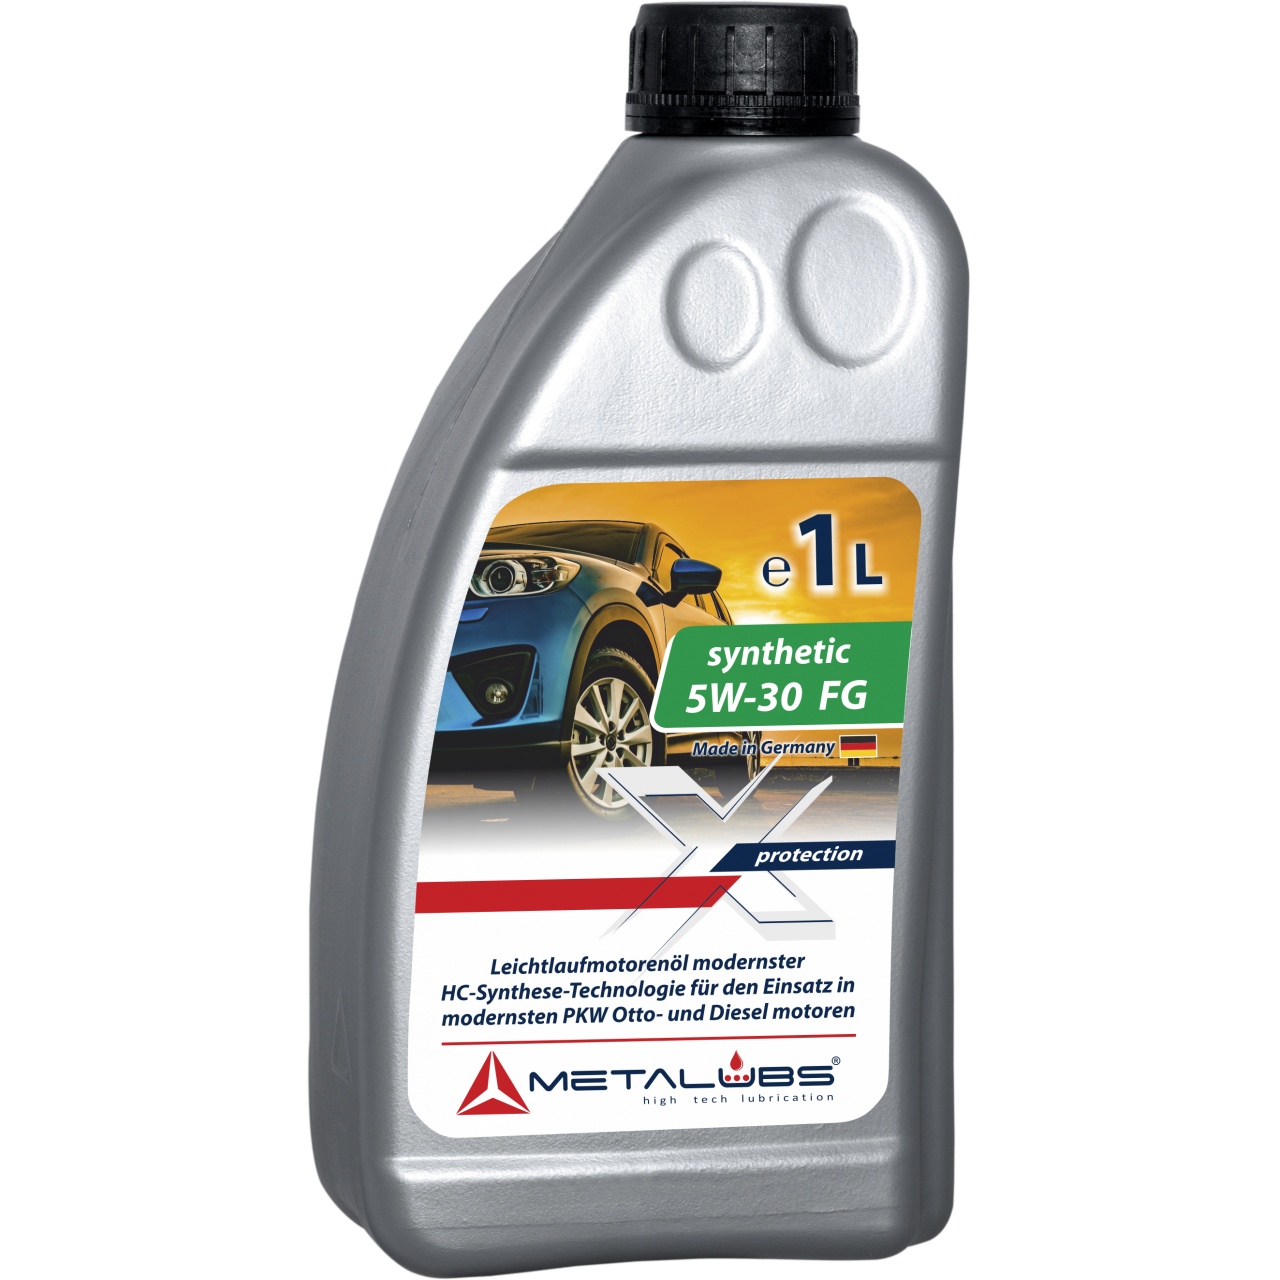 Metalubs Synthetic Oil 5W-30 FG 1l